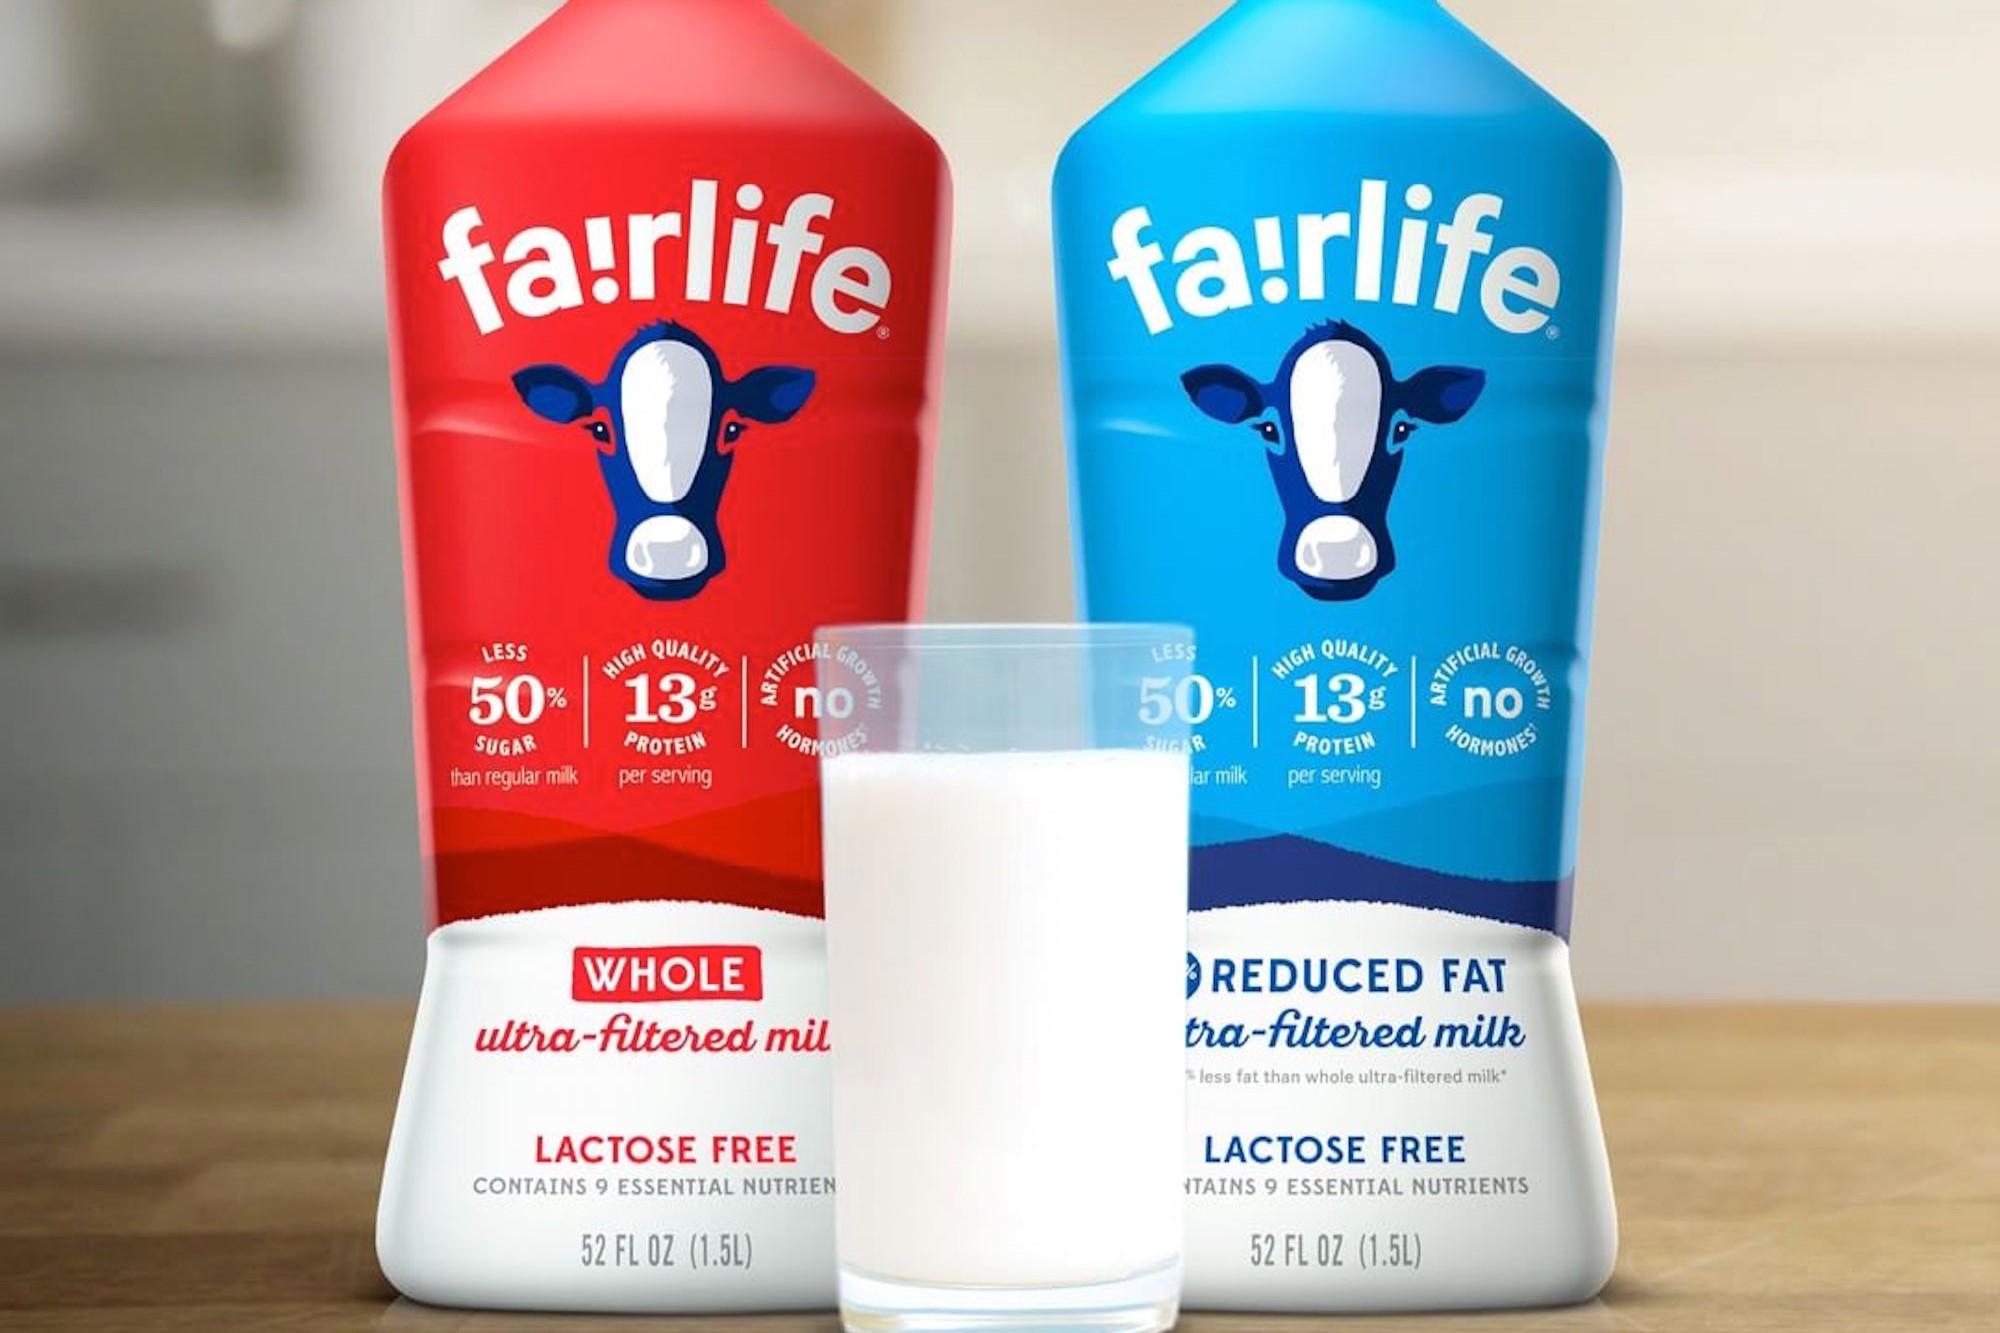 19-fairlife-fat-free-milk-nutrition-facts